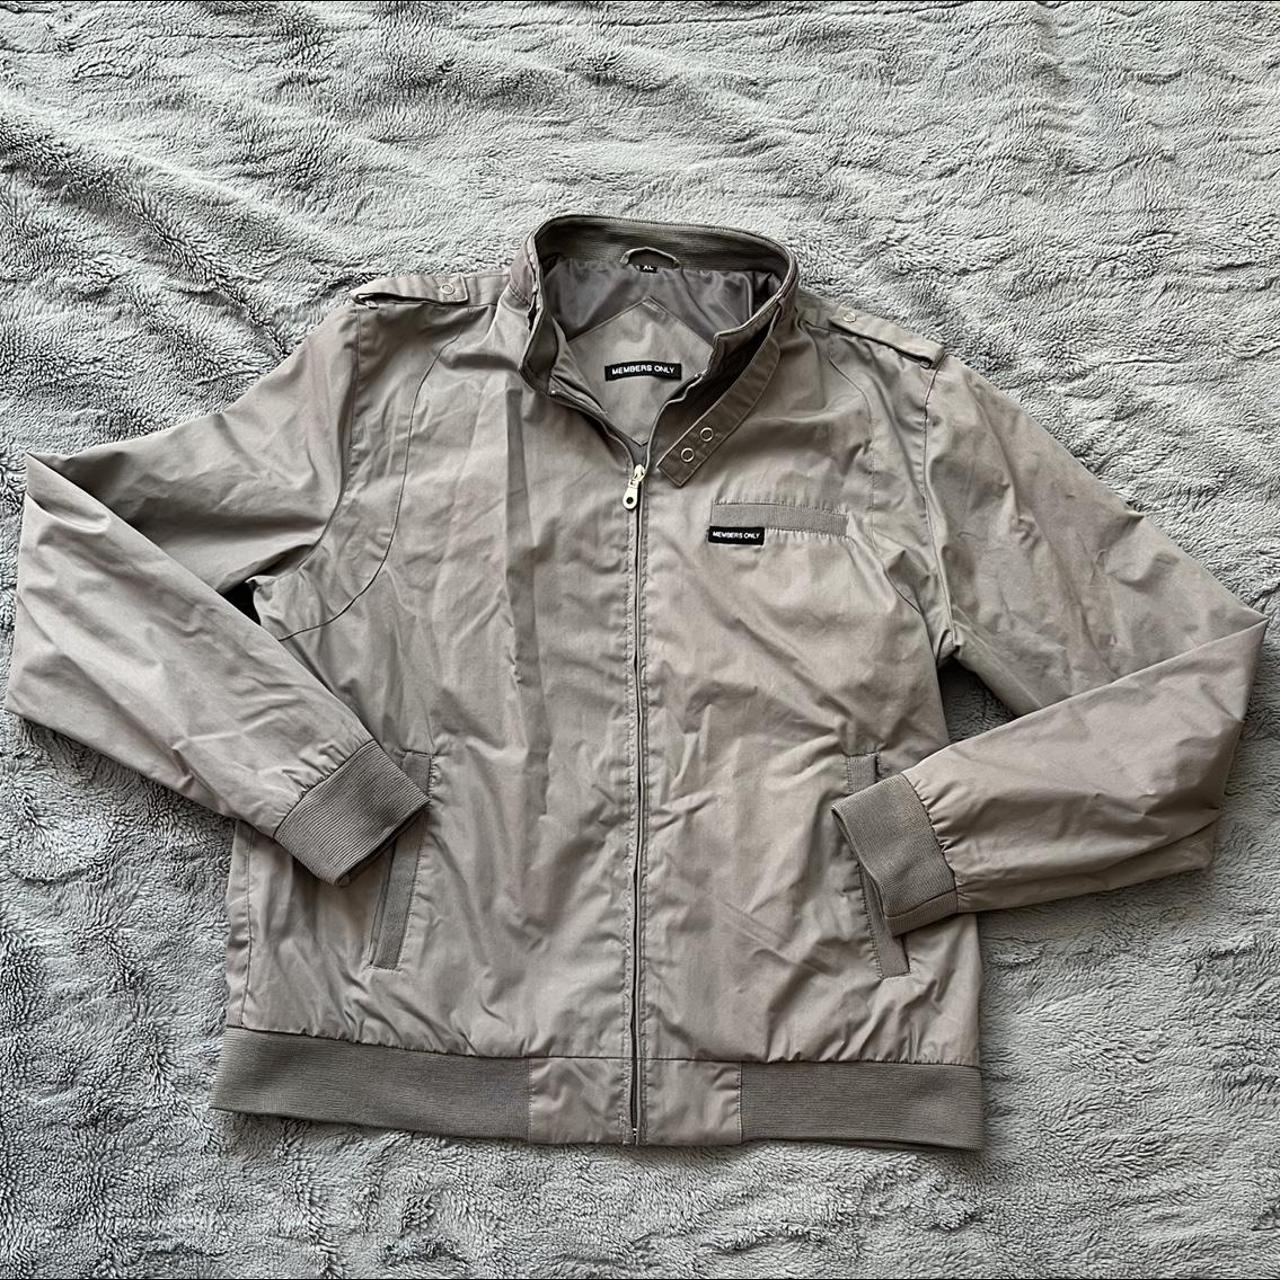 Product Image 2 - 80s Gray Members Only Jacket
FREE